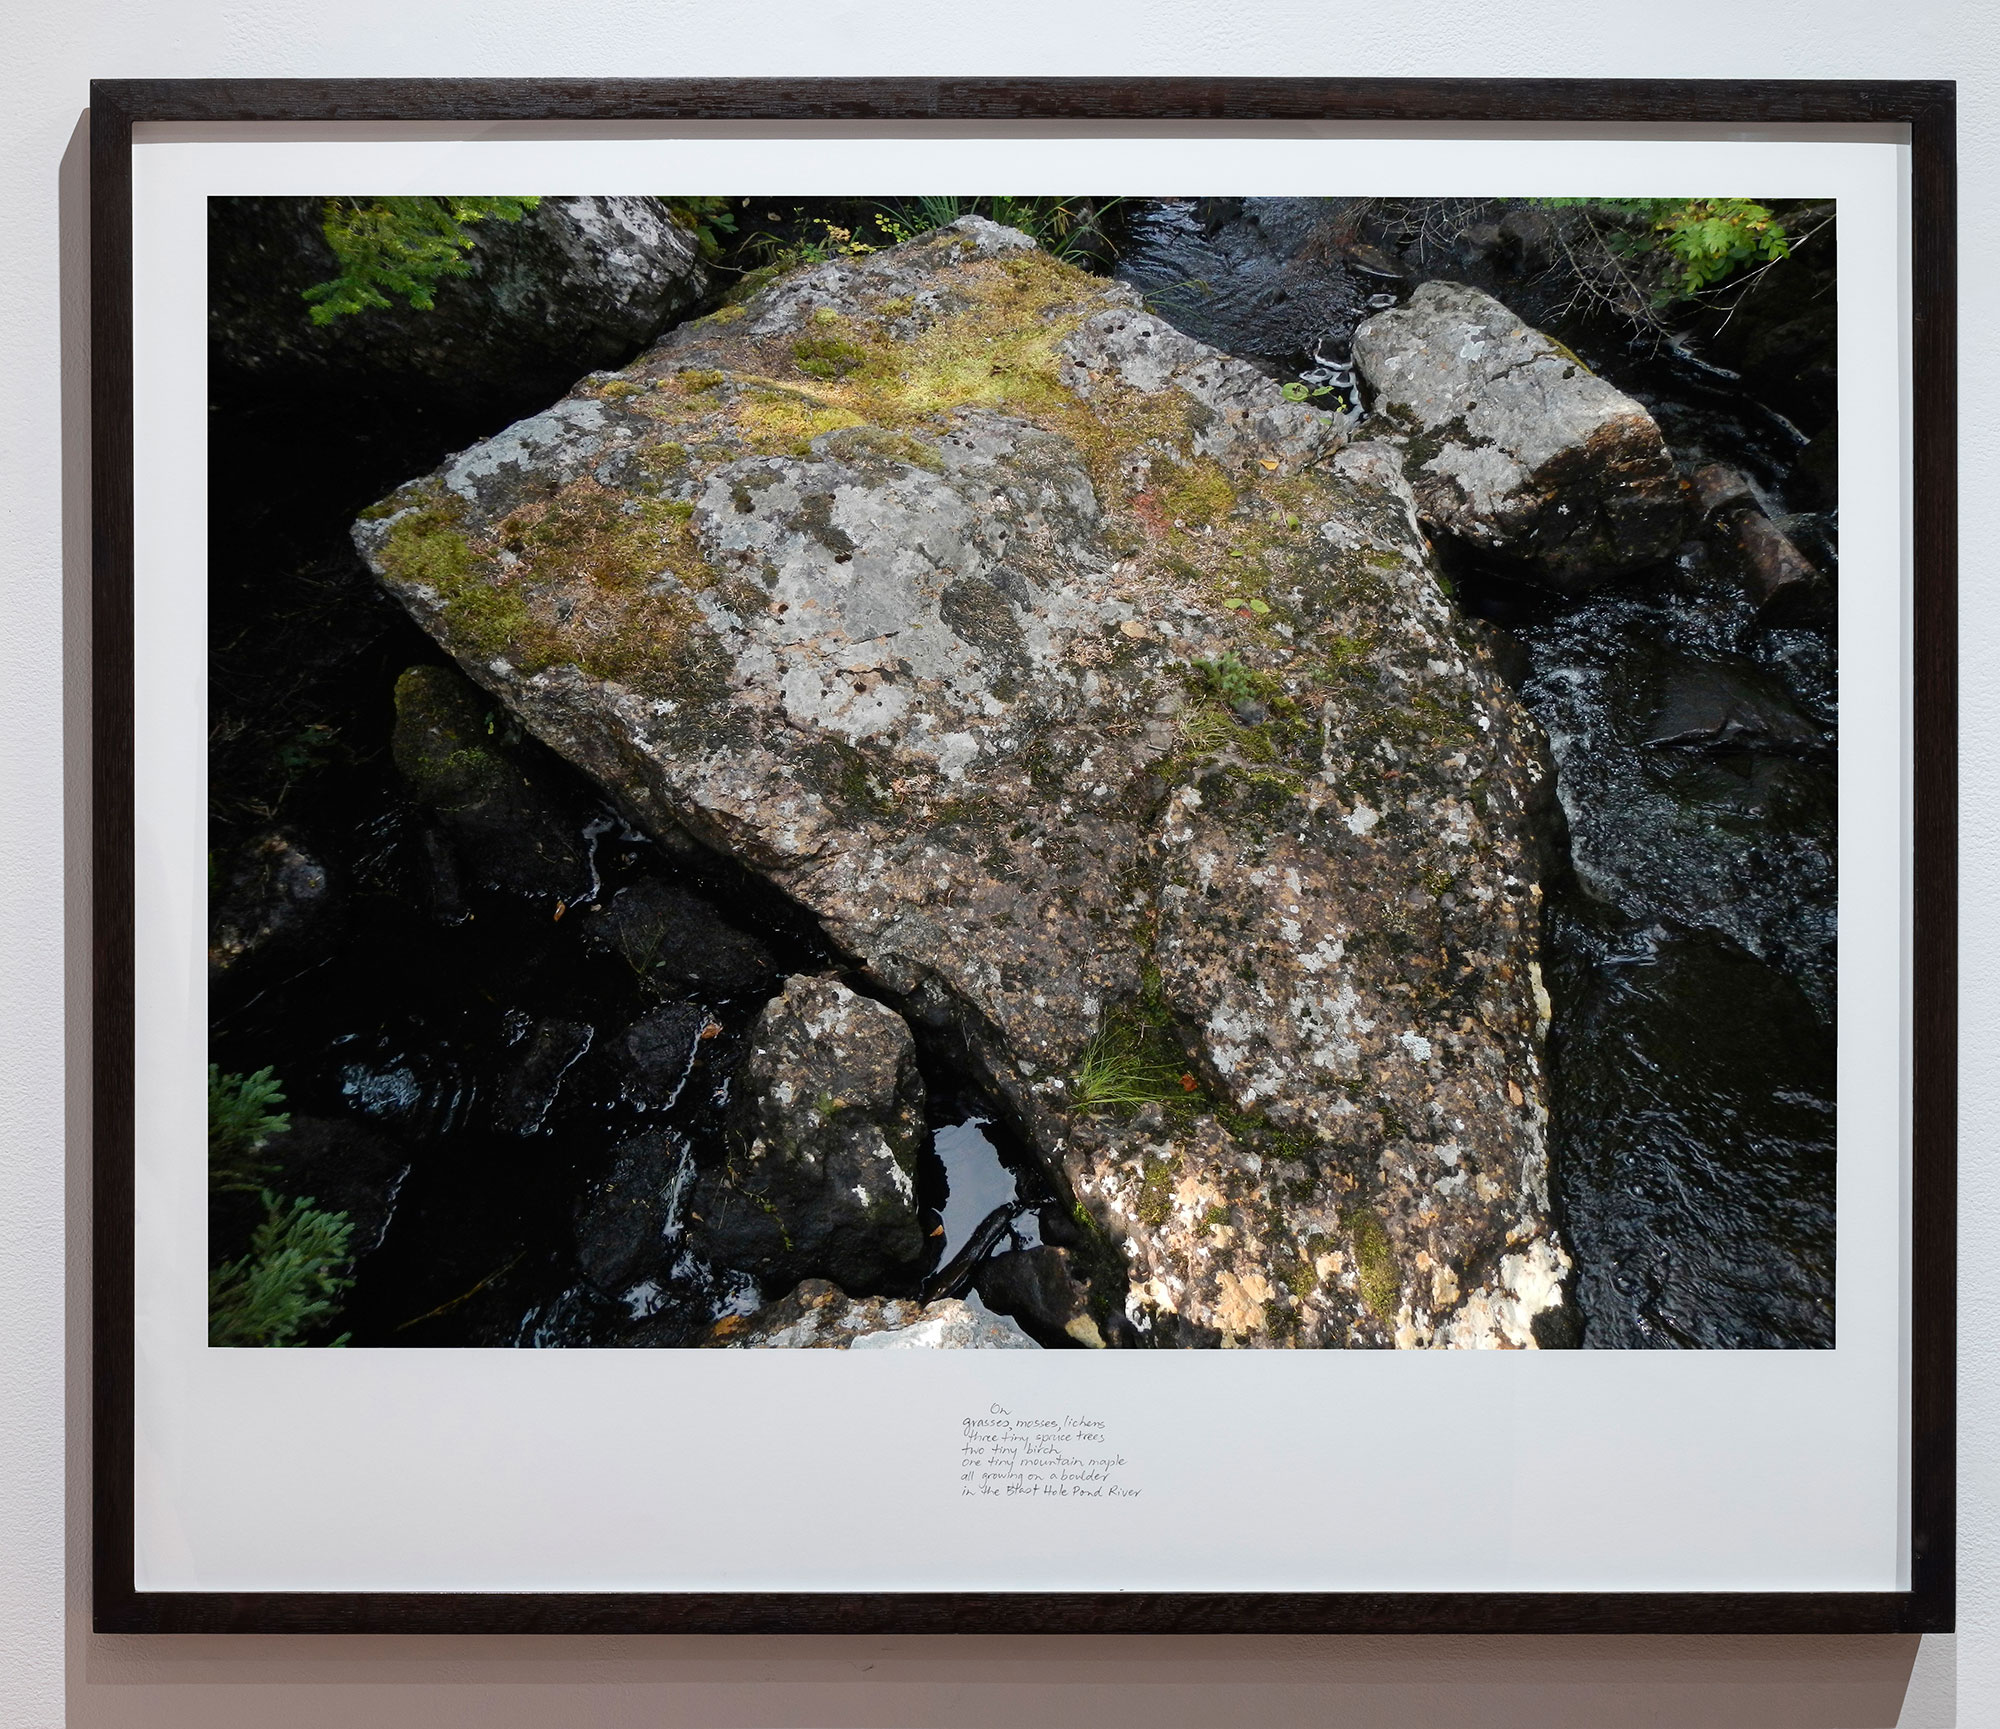 excerpt from On the Large Boulder in the Blast Hole Pond River, Summer 2020  from the series Between the Earth and the Firmament, Blast Hole Pond Road, Newfoundland 2020